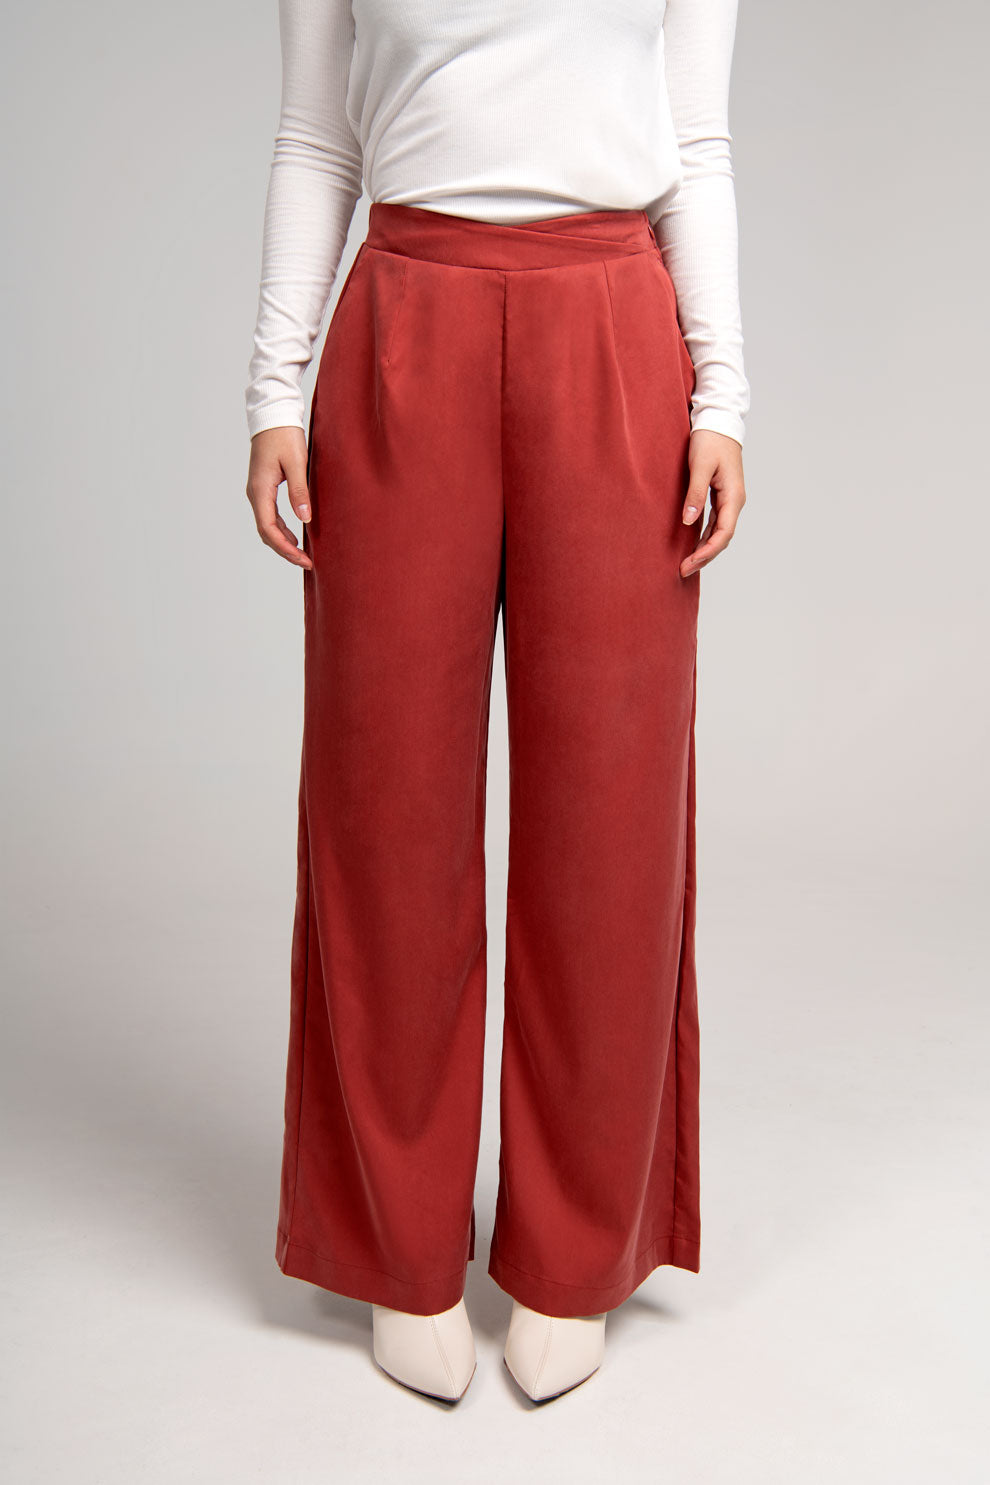 Terracotta Red Crossover Pant